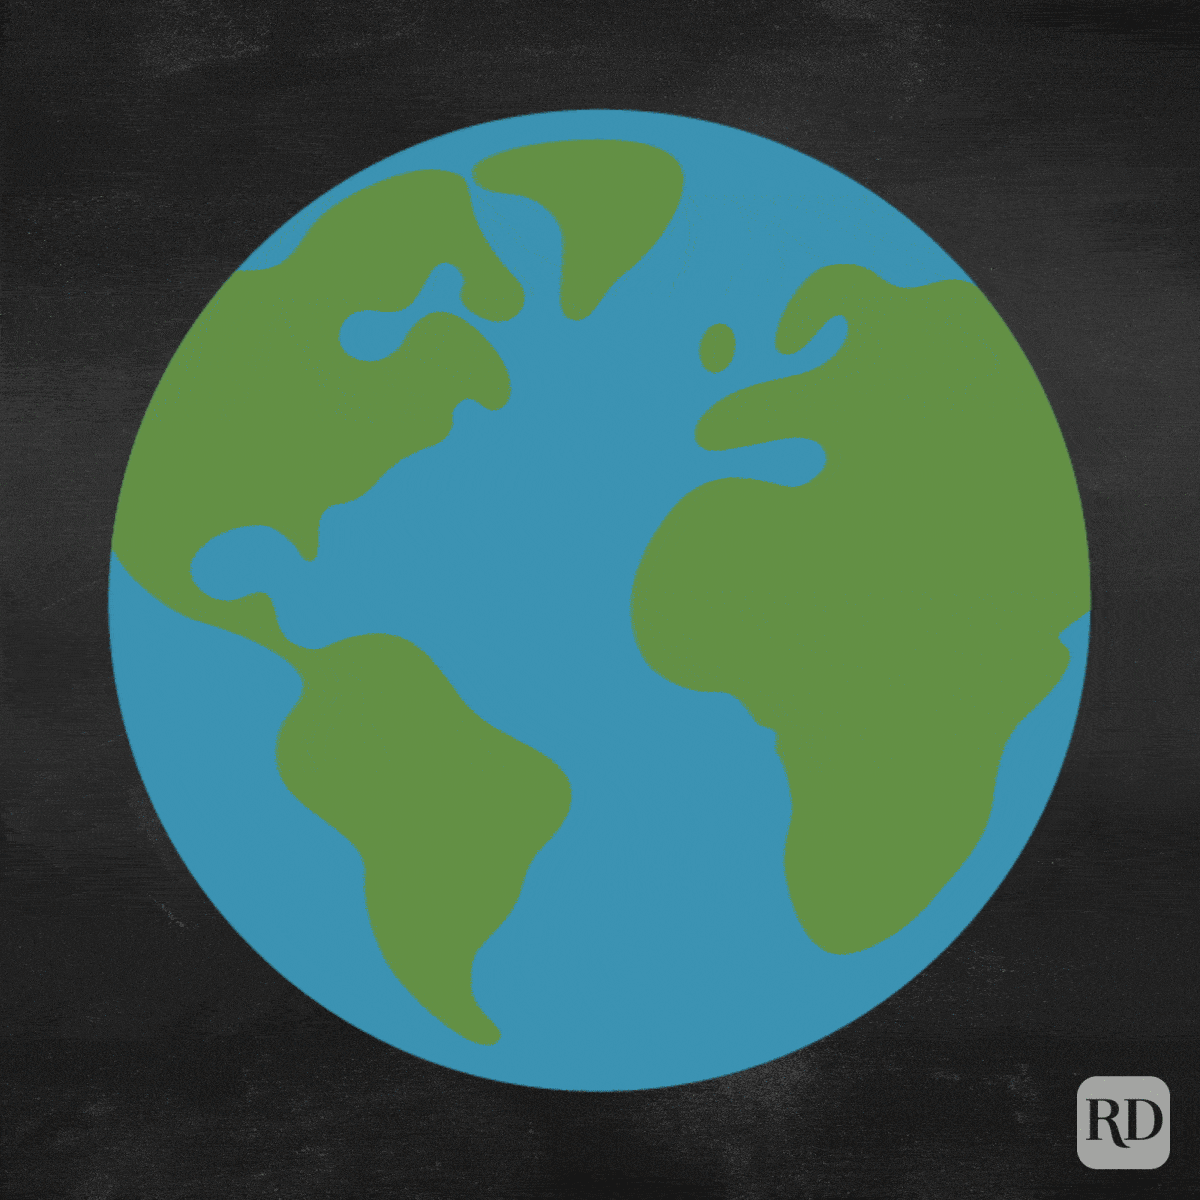 Geography question and answer on an Illustrated globe with chalkboard background